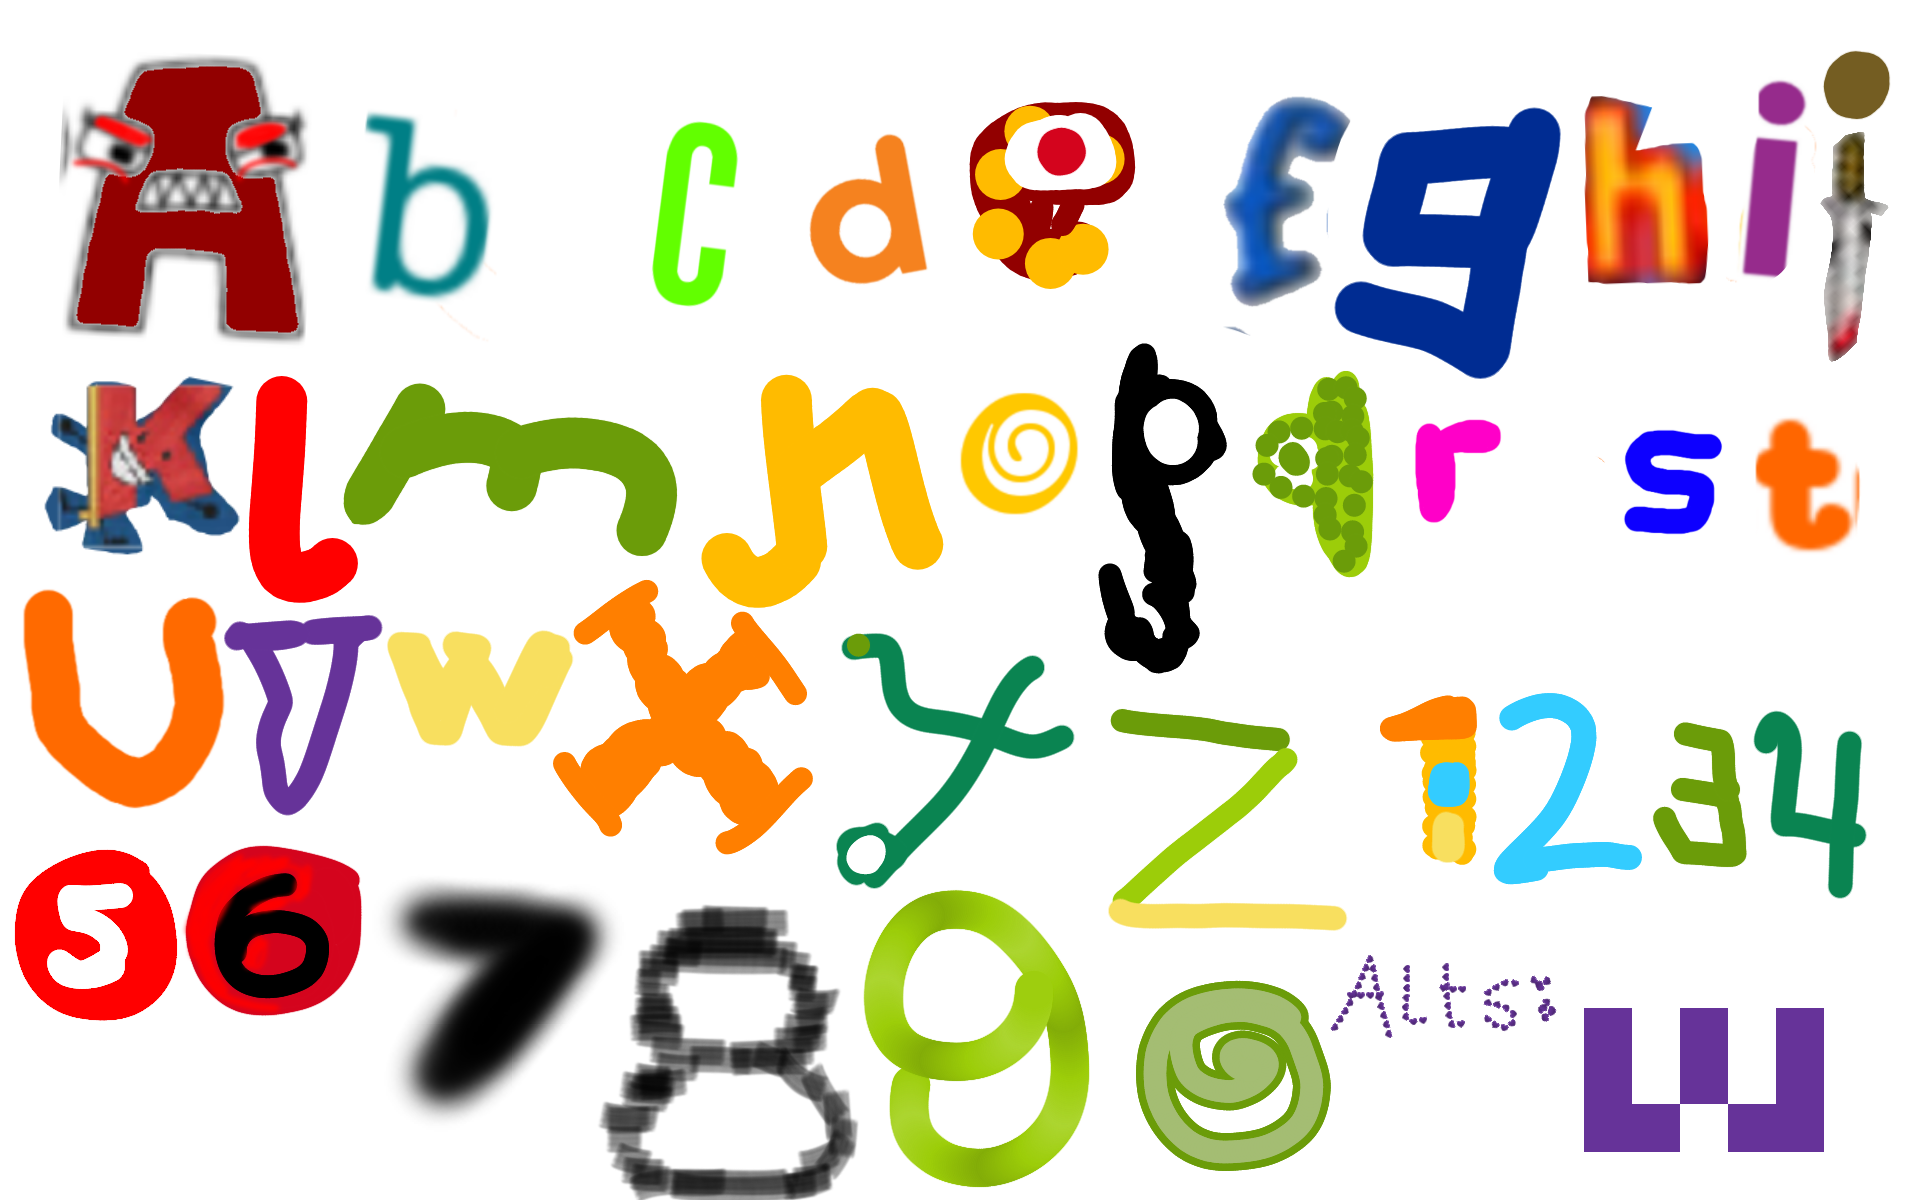 Corus Alphabet and Numbers by Amilio1231st on DeviantArt